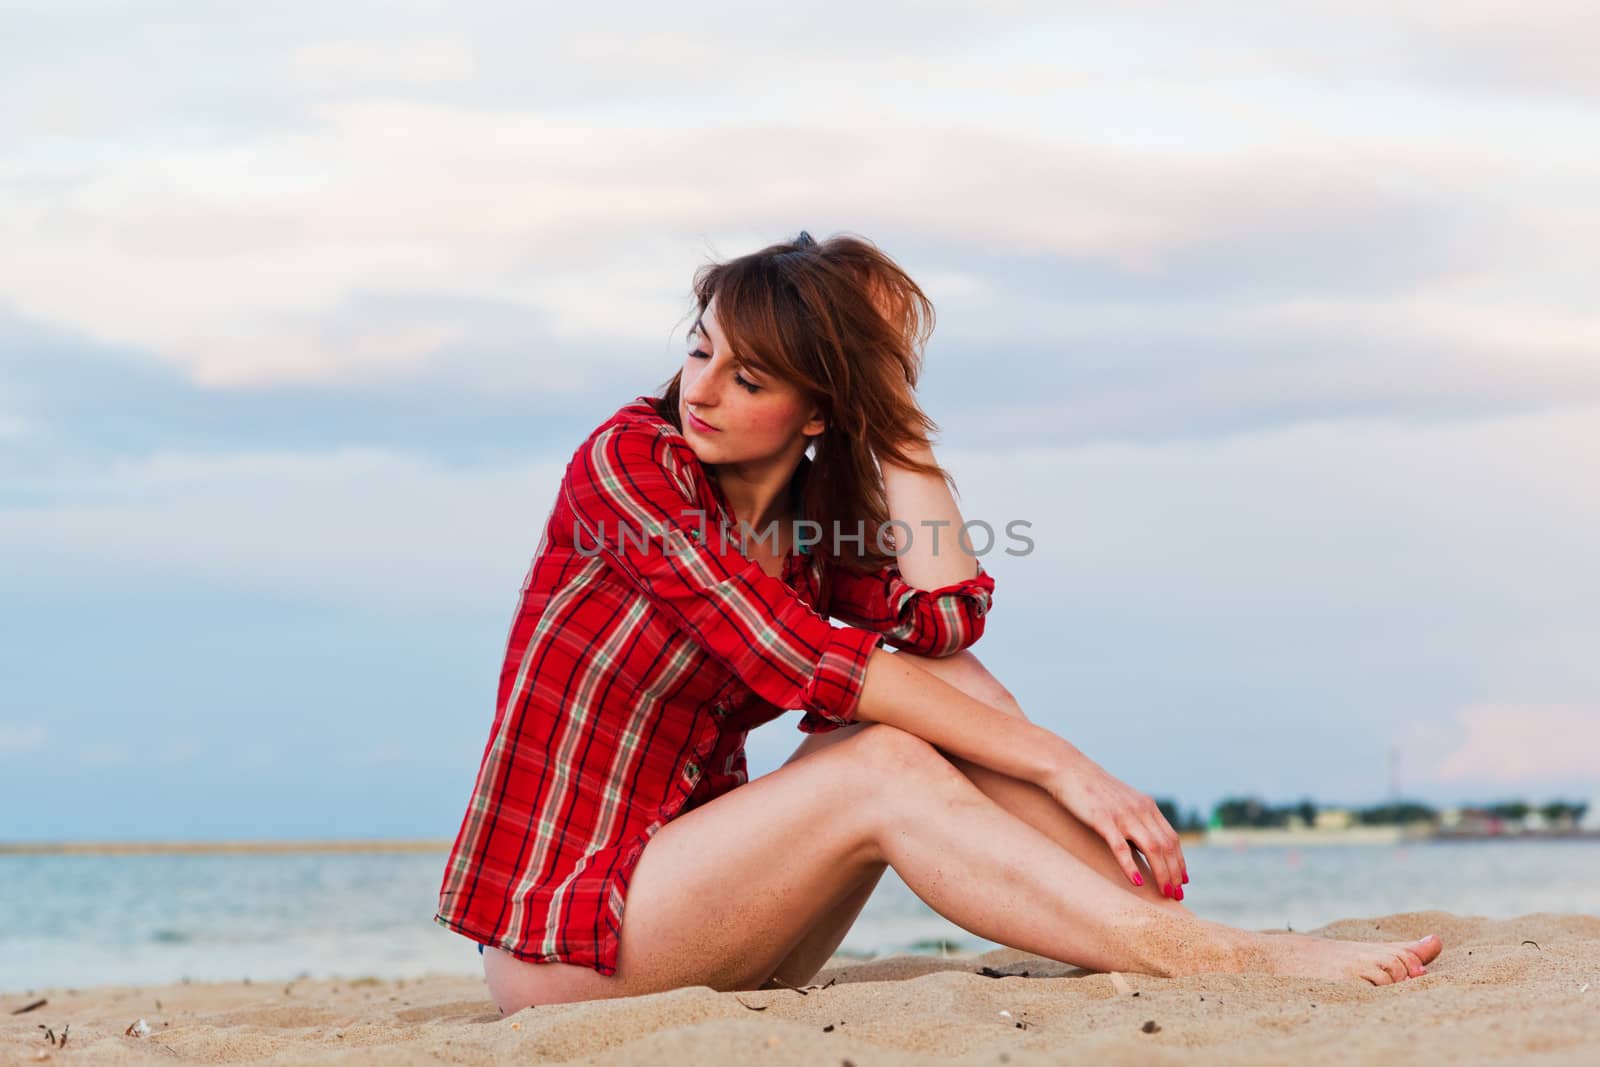 Pretty fashionable young woman in a chequered red shirt relaxing on the beach